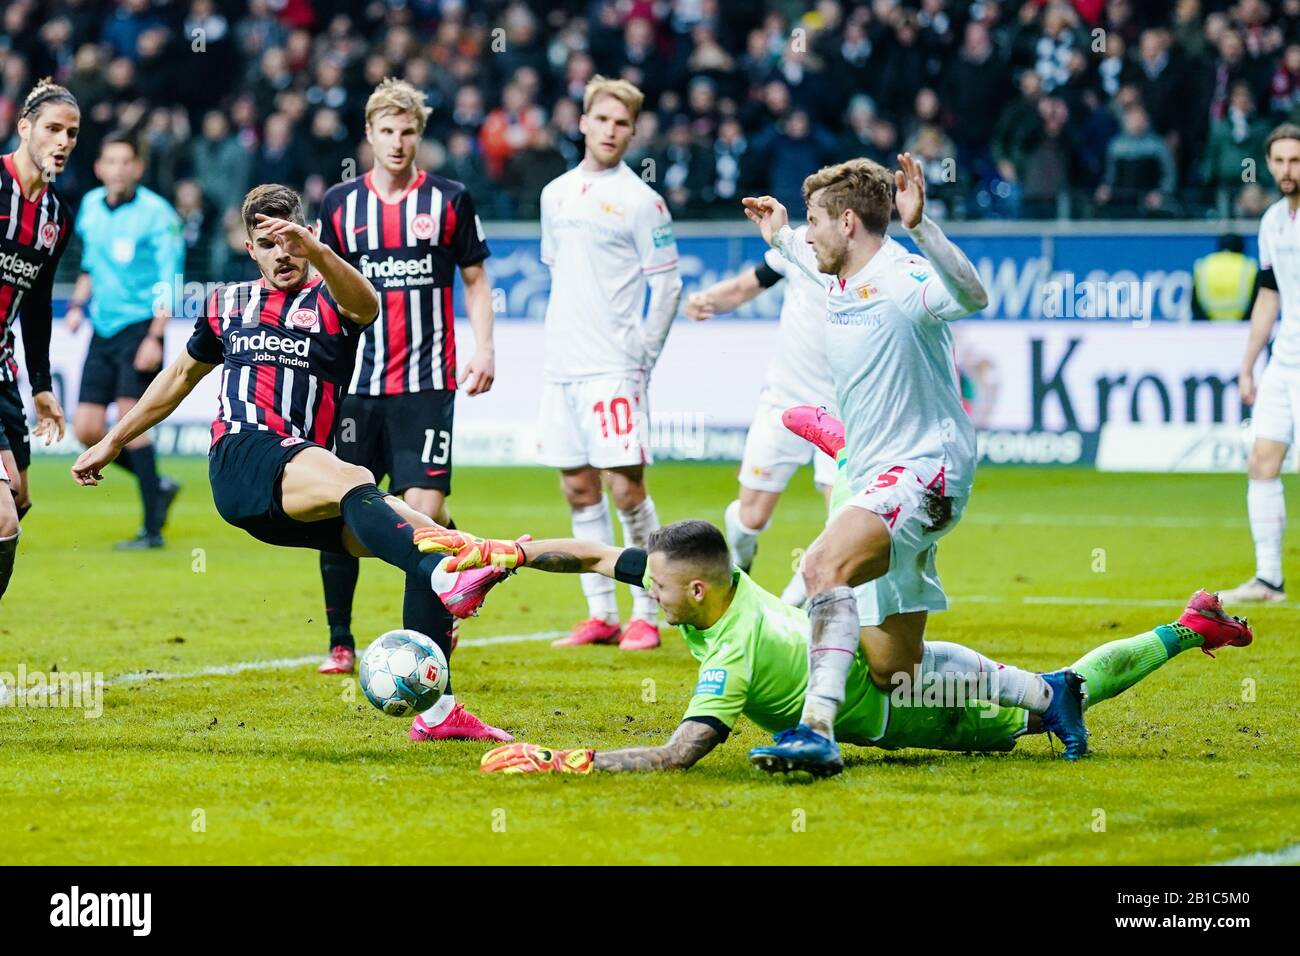 24 February 2020, Hessen, Frankfurt/Main: Football: Bundesliga, 23rd matchday, Eintracht Frankfurt - 1 FC Union Berlin, in the Commerzbank Arena. Frankfurt's Andre Silva (l) fails against Berlin goalkeeper Rafal Gikiewicz. Photo: Uwe Anspach/dpa - IMPORTANT NOTE: In accordance with the regulations of the DFL Deutsche Fußball Liga and the DFB Deutscher Fußball-Bund, it is prohibited to exploit or have exploited in the stadium and/or from the game taken photographs in the form of sequence images and/or video-like photo series. Stock Photo